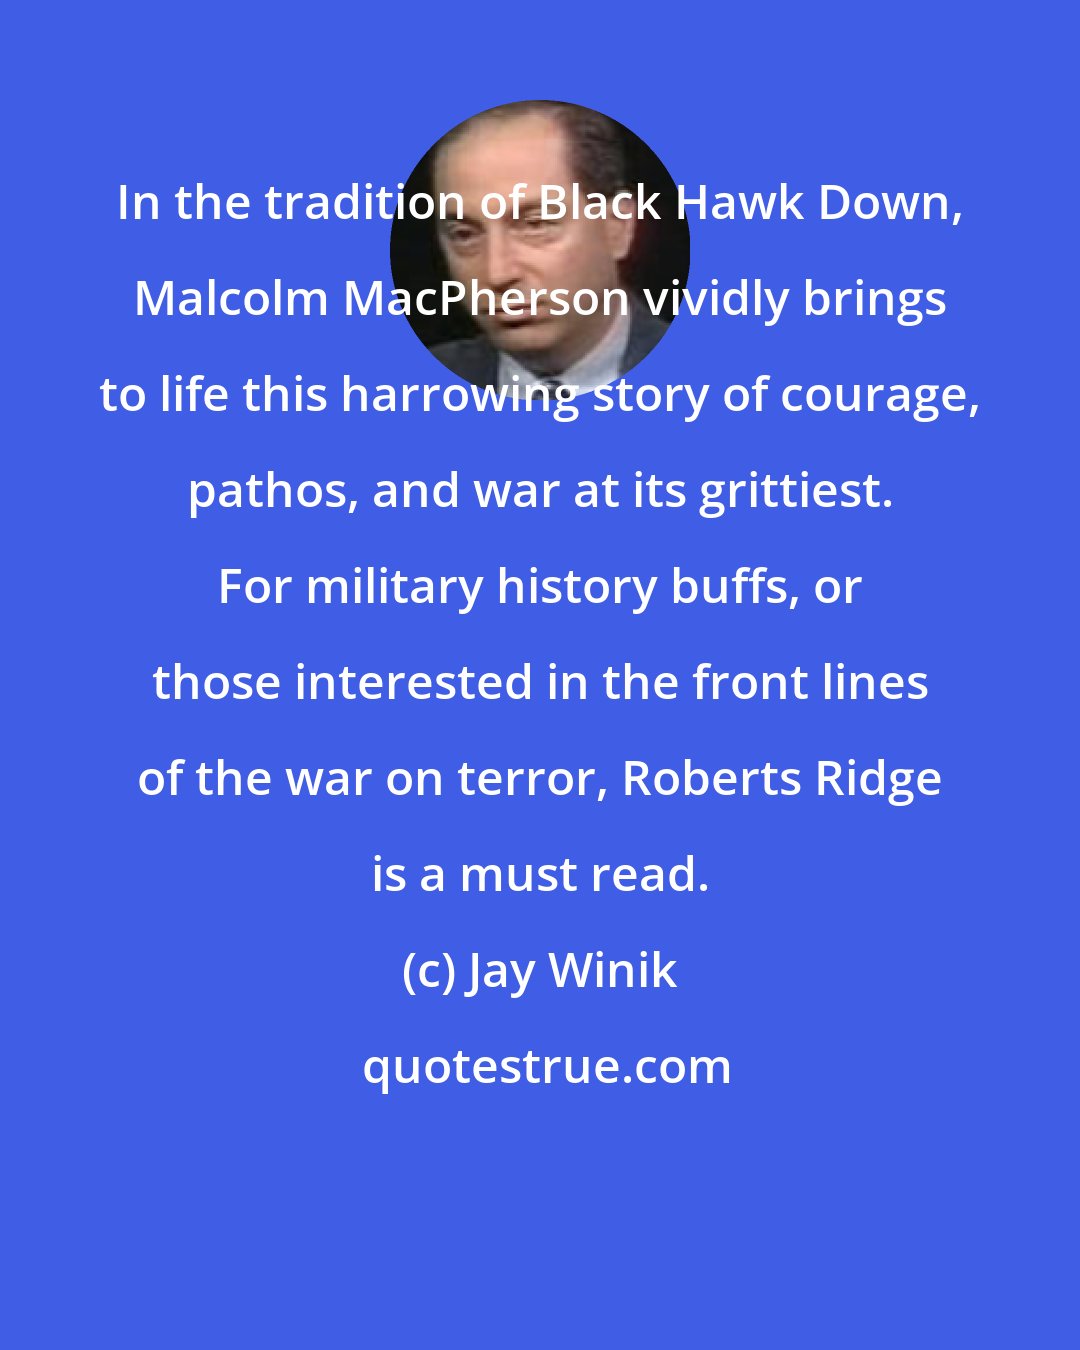 Jay Winik: In the tradition of Black Hawk Down, Malcolm MacPherson vividly brings to life this harrowing story of courage, pathos, and war at its grittiest. For military history buffs, or those interested in the front lines of the war on terror, Roberts Ridge is a must read.